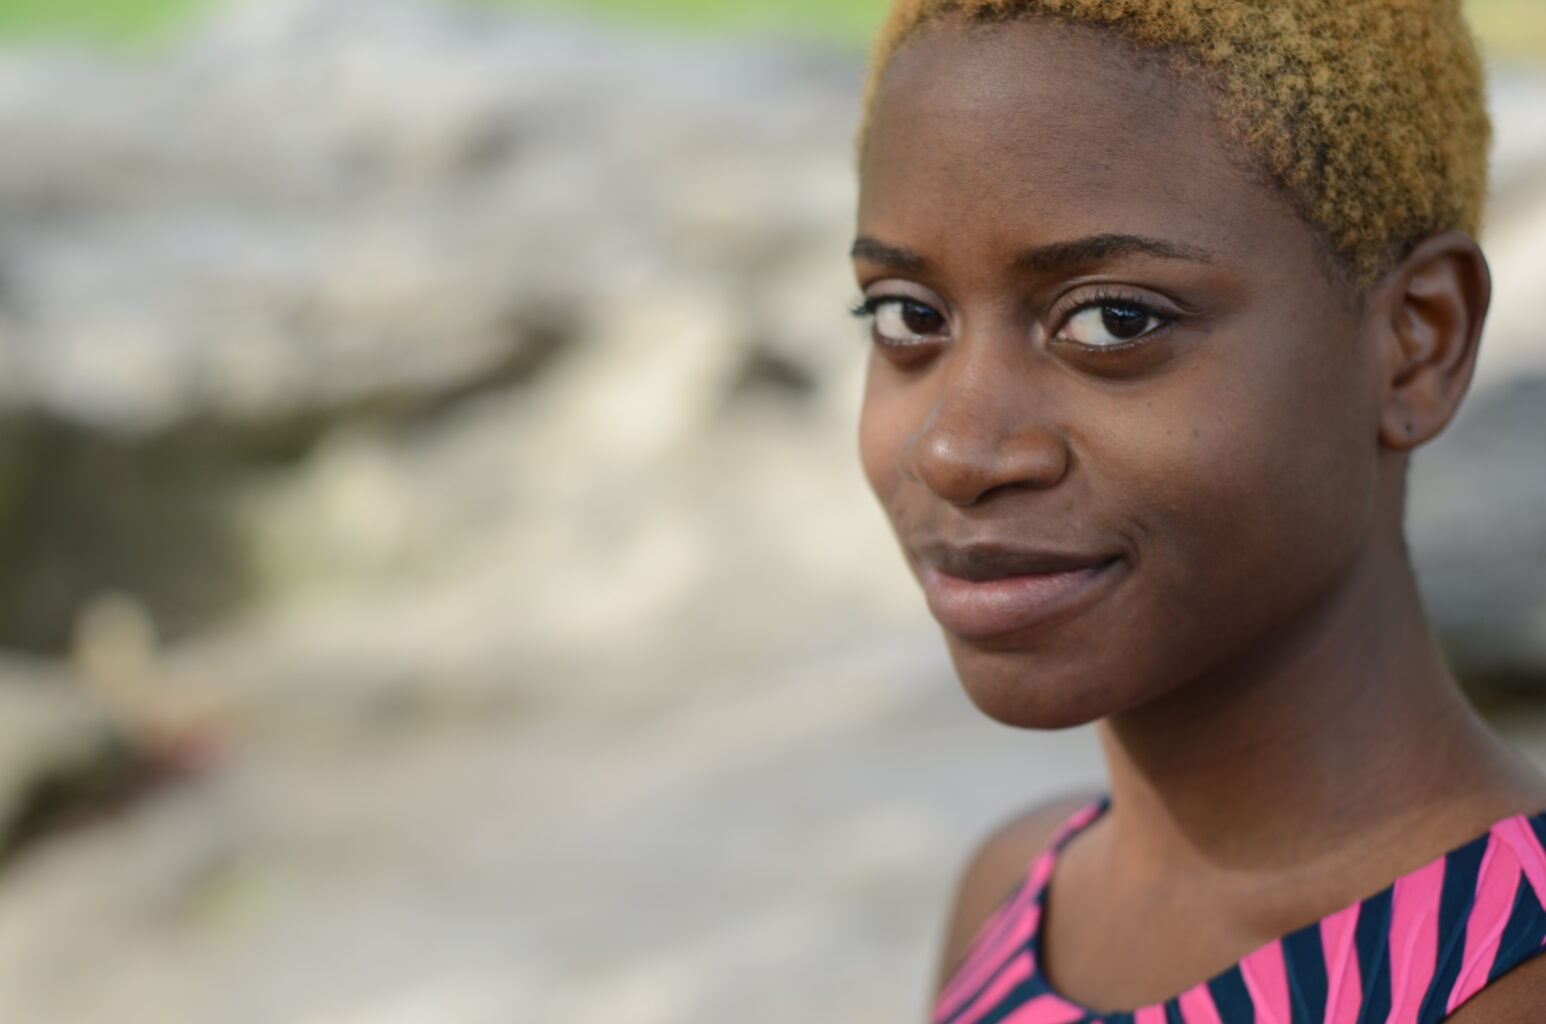 A headshot of Katrina Reid. She is a Black femme woman with short, almost shaved bleached hair, smiling while looking at the camera, her face pointed away to the left. There is a blurred landscape behind her that looks like a rock formation. She is wearing a pink and black shirt.